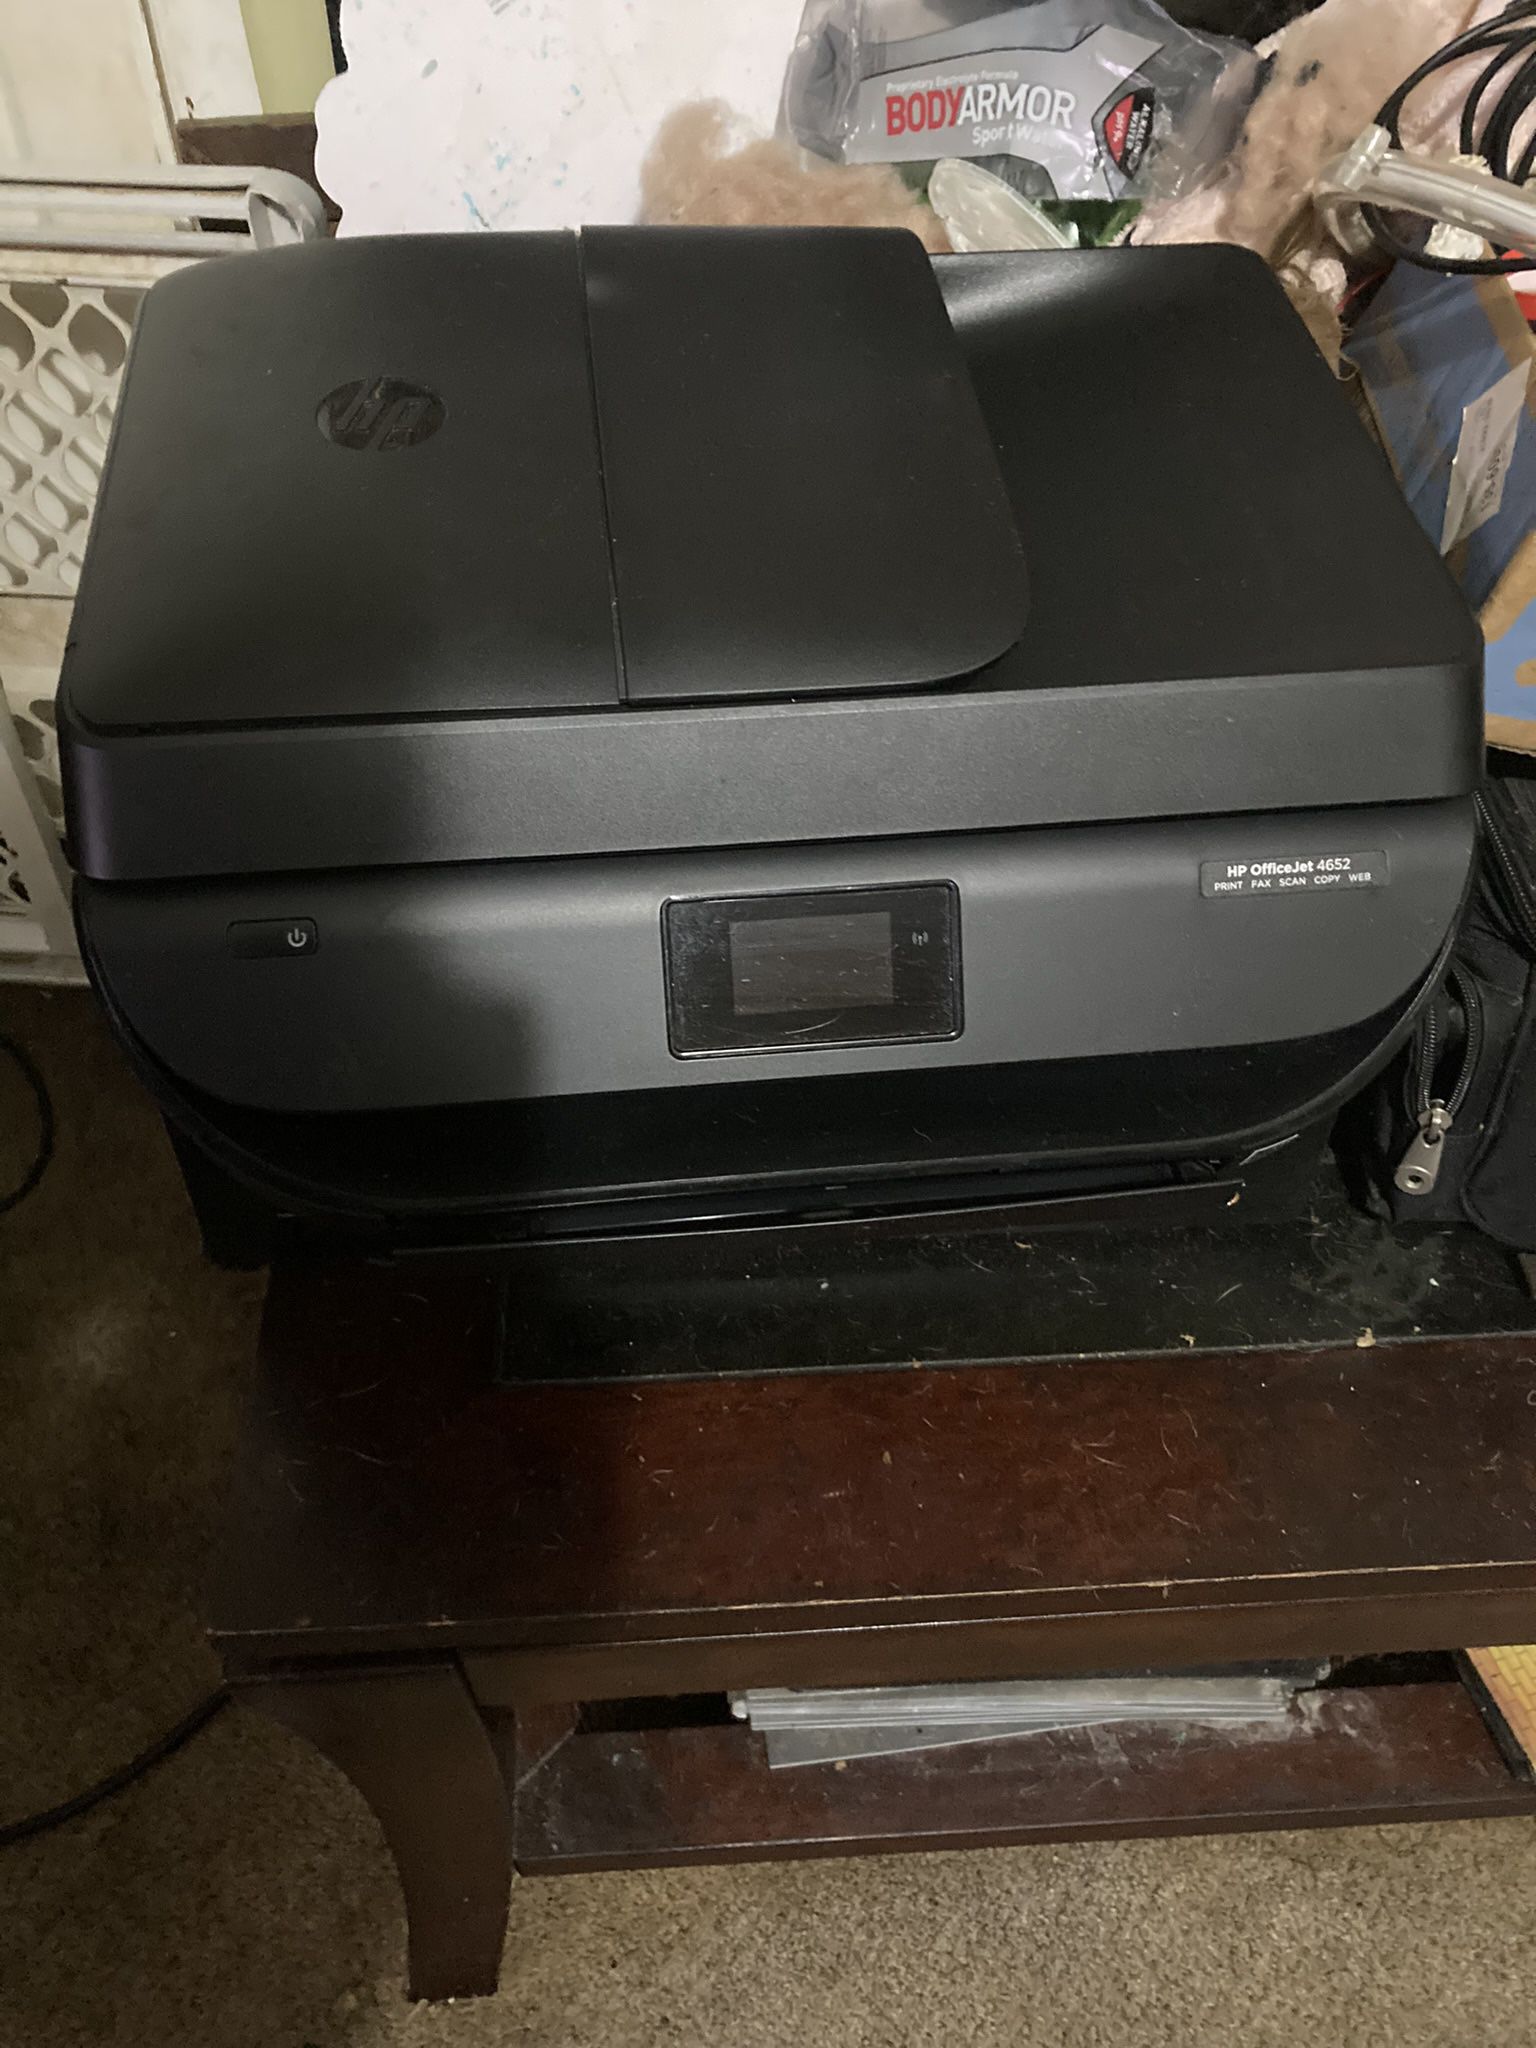 Snestorm Søgemaskine markedsføring For pokker Hp Printer Fax Copier Printer Bluetooth Capabilities With 2 Monitors for  Sale in Byron, GA - OfferUp